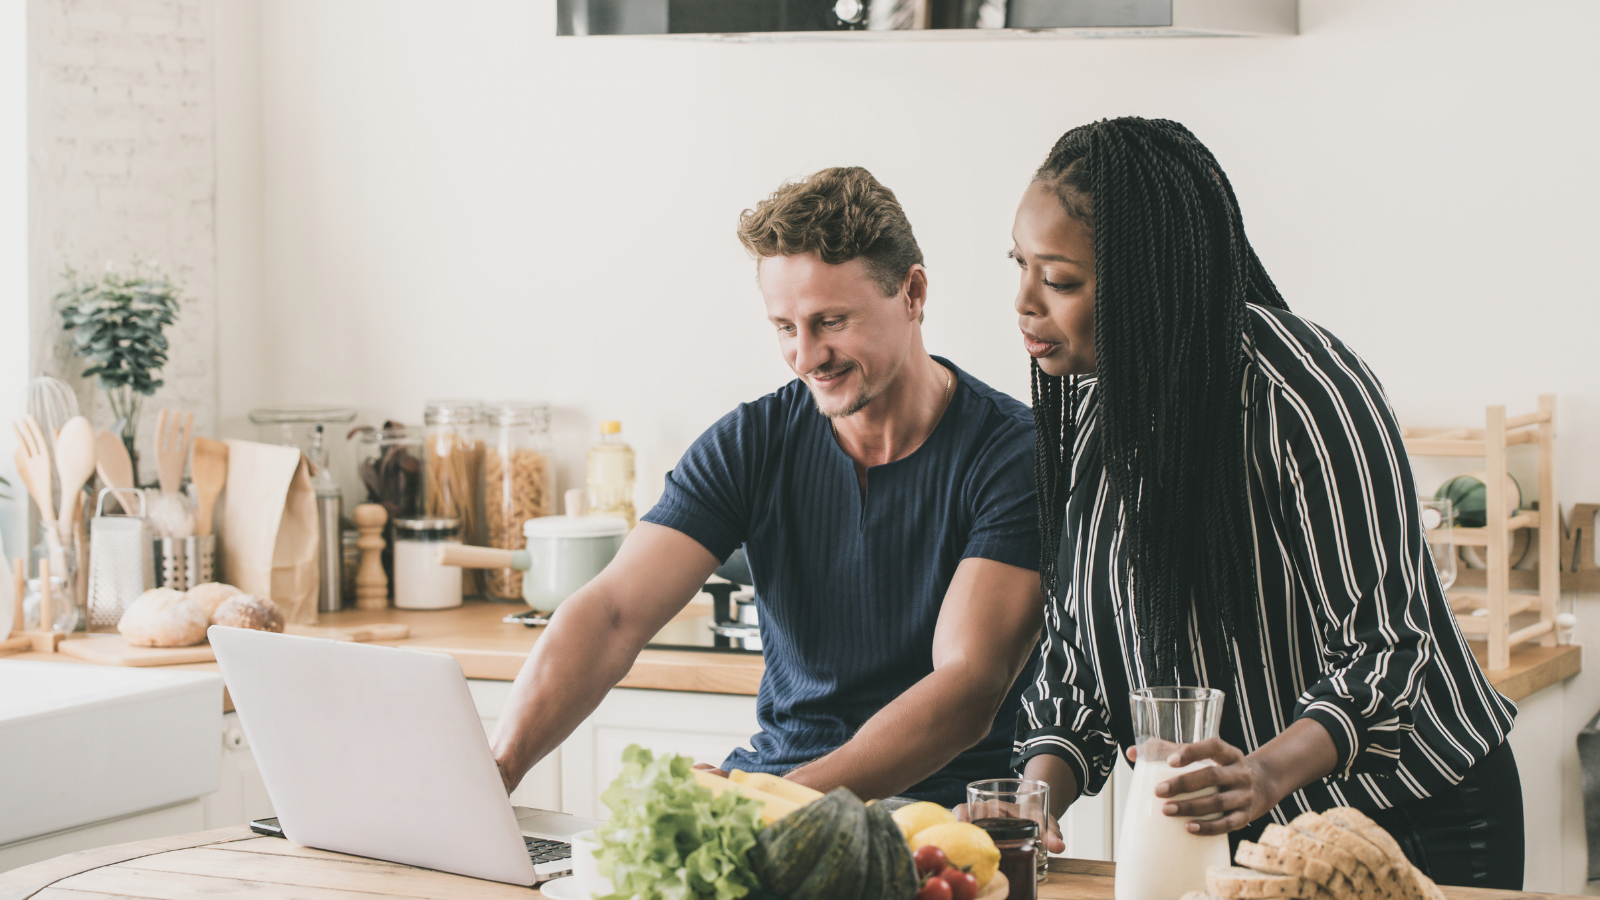 An interracial couple learns about diversity in relationships by watching LifeSpeak videos on their laptop in their kitchen.